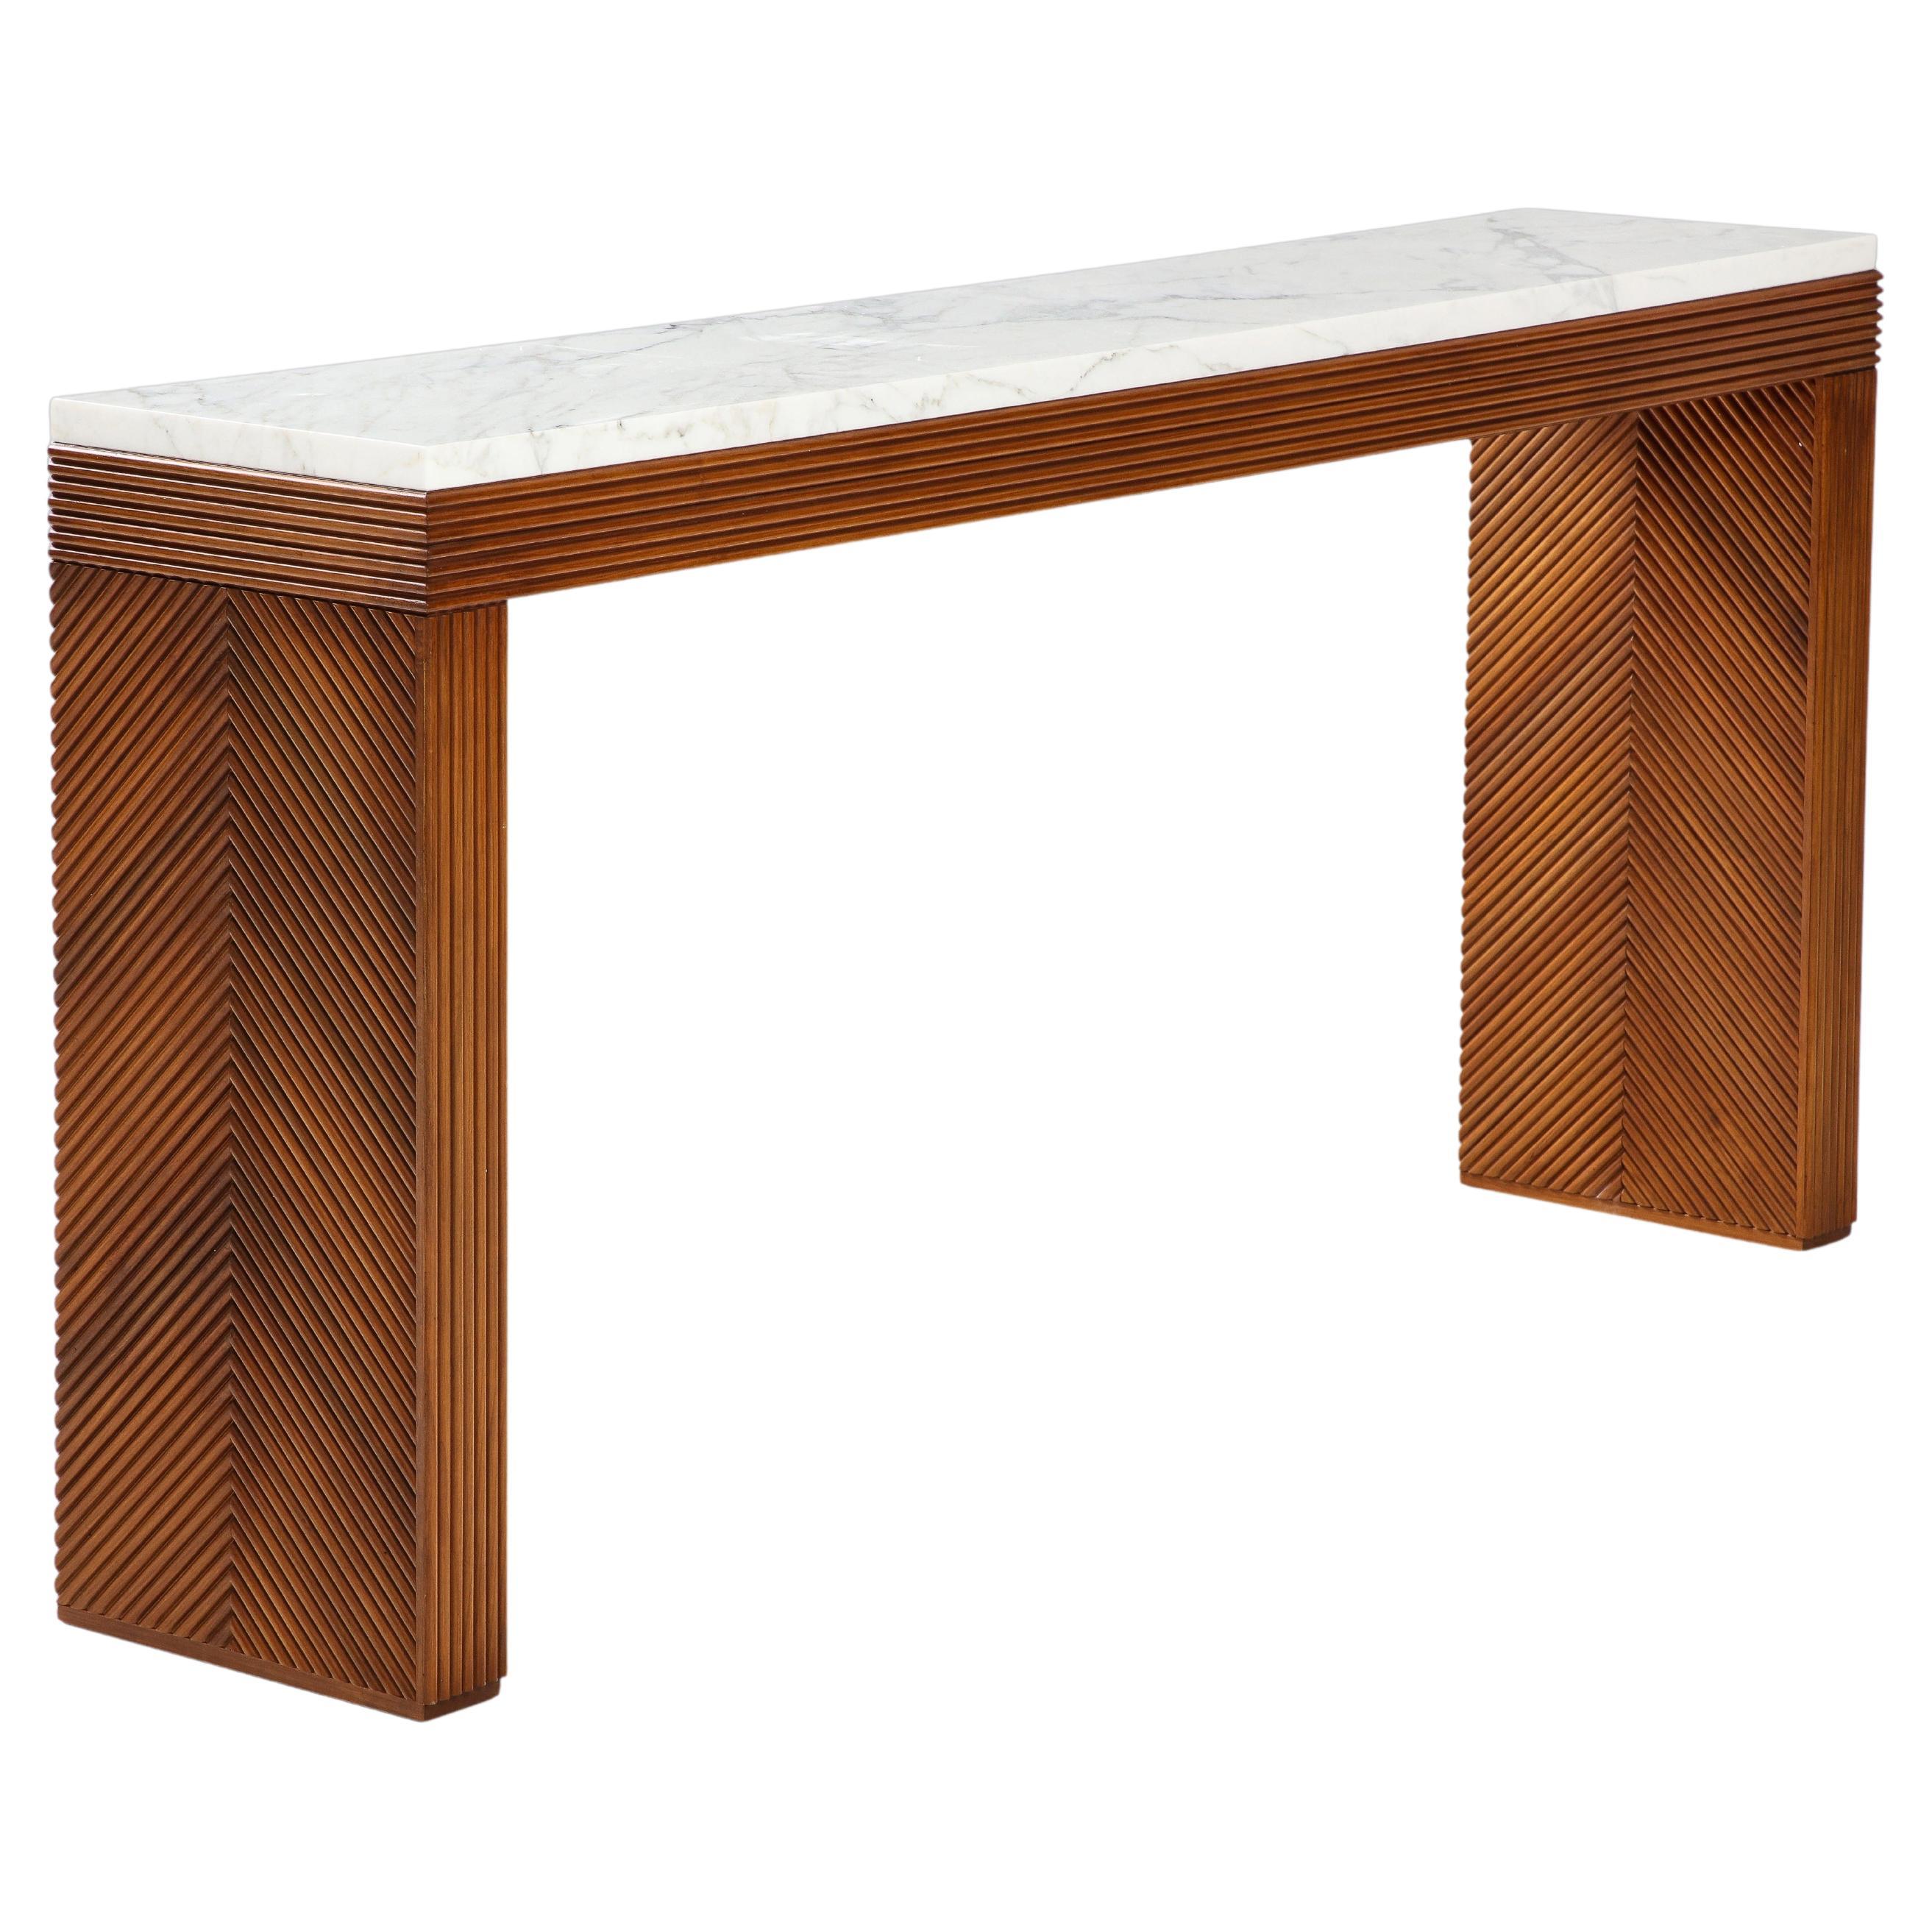 Contemporary Italian Cherry Wood and Carrara Marble Console For Sale